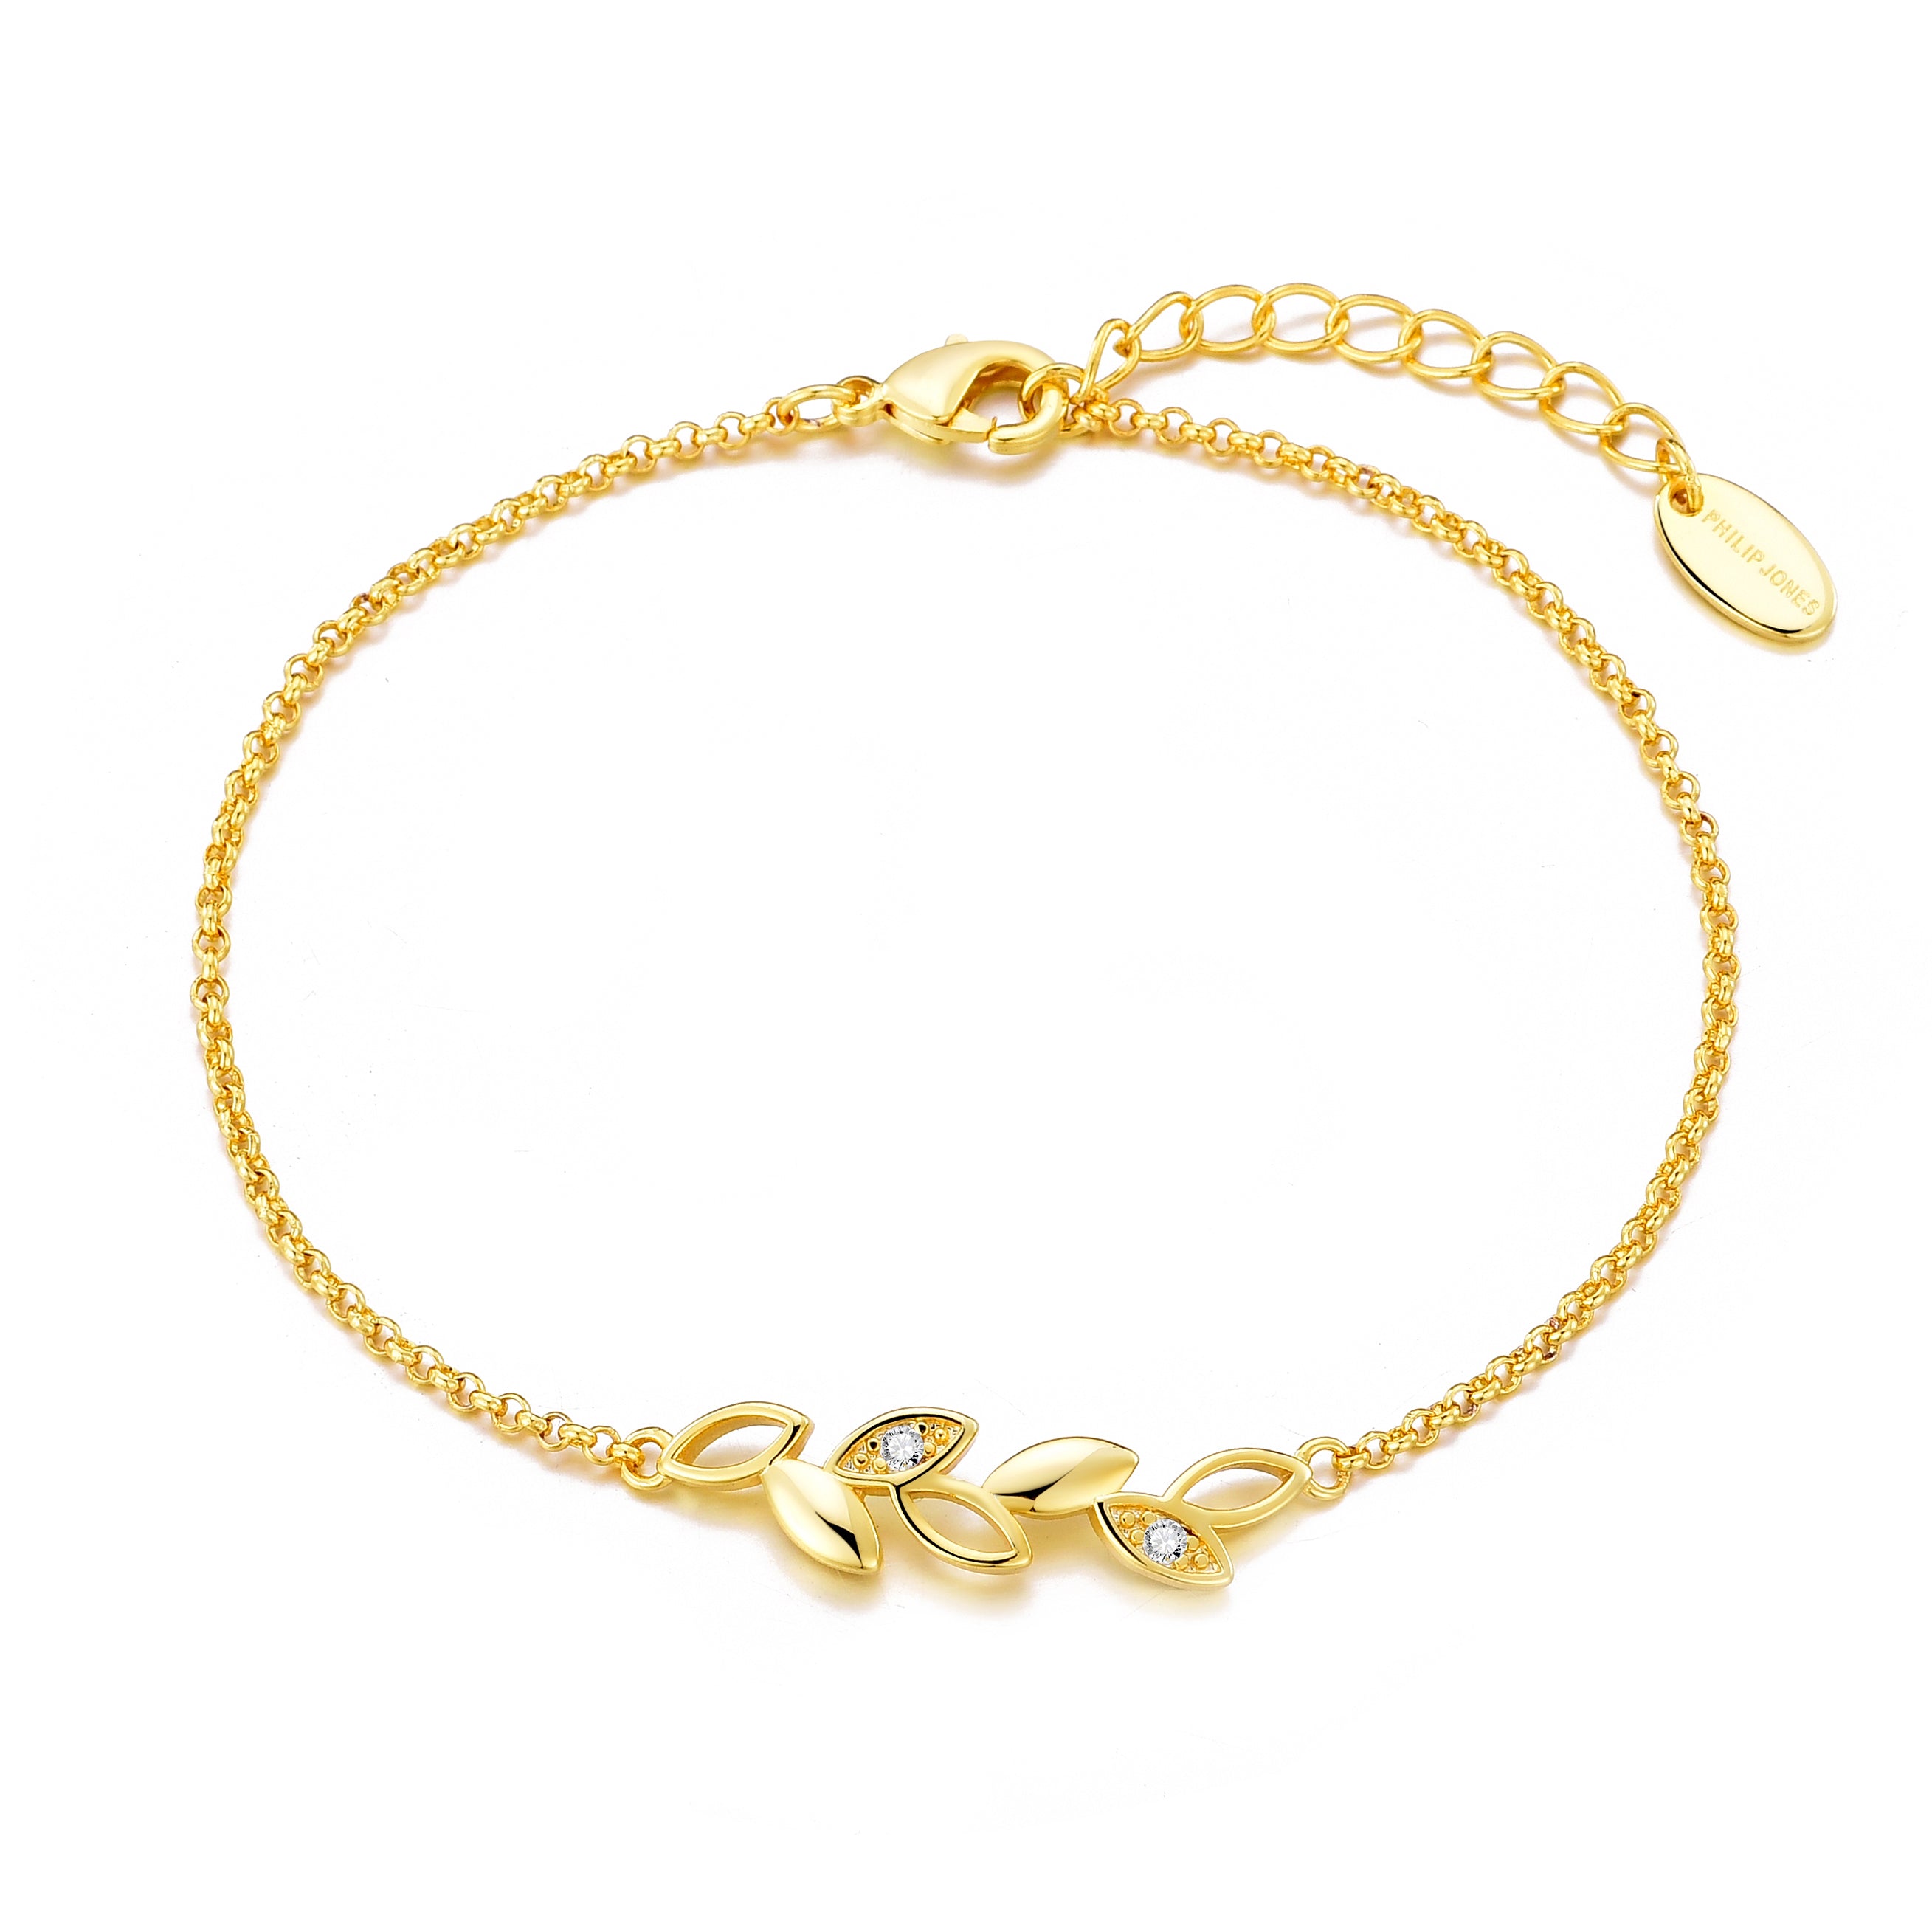 Gold Plated Leaf Chain Bracelet Created with Zircondia® Crystals by Philip Jones Jewellery